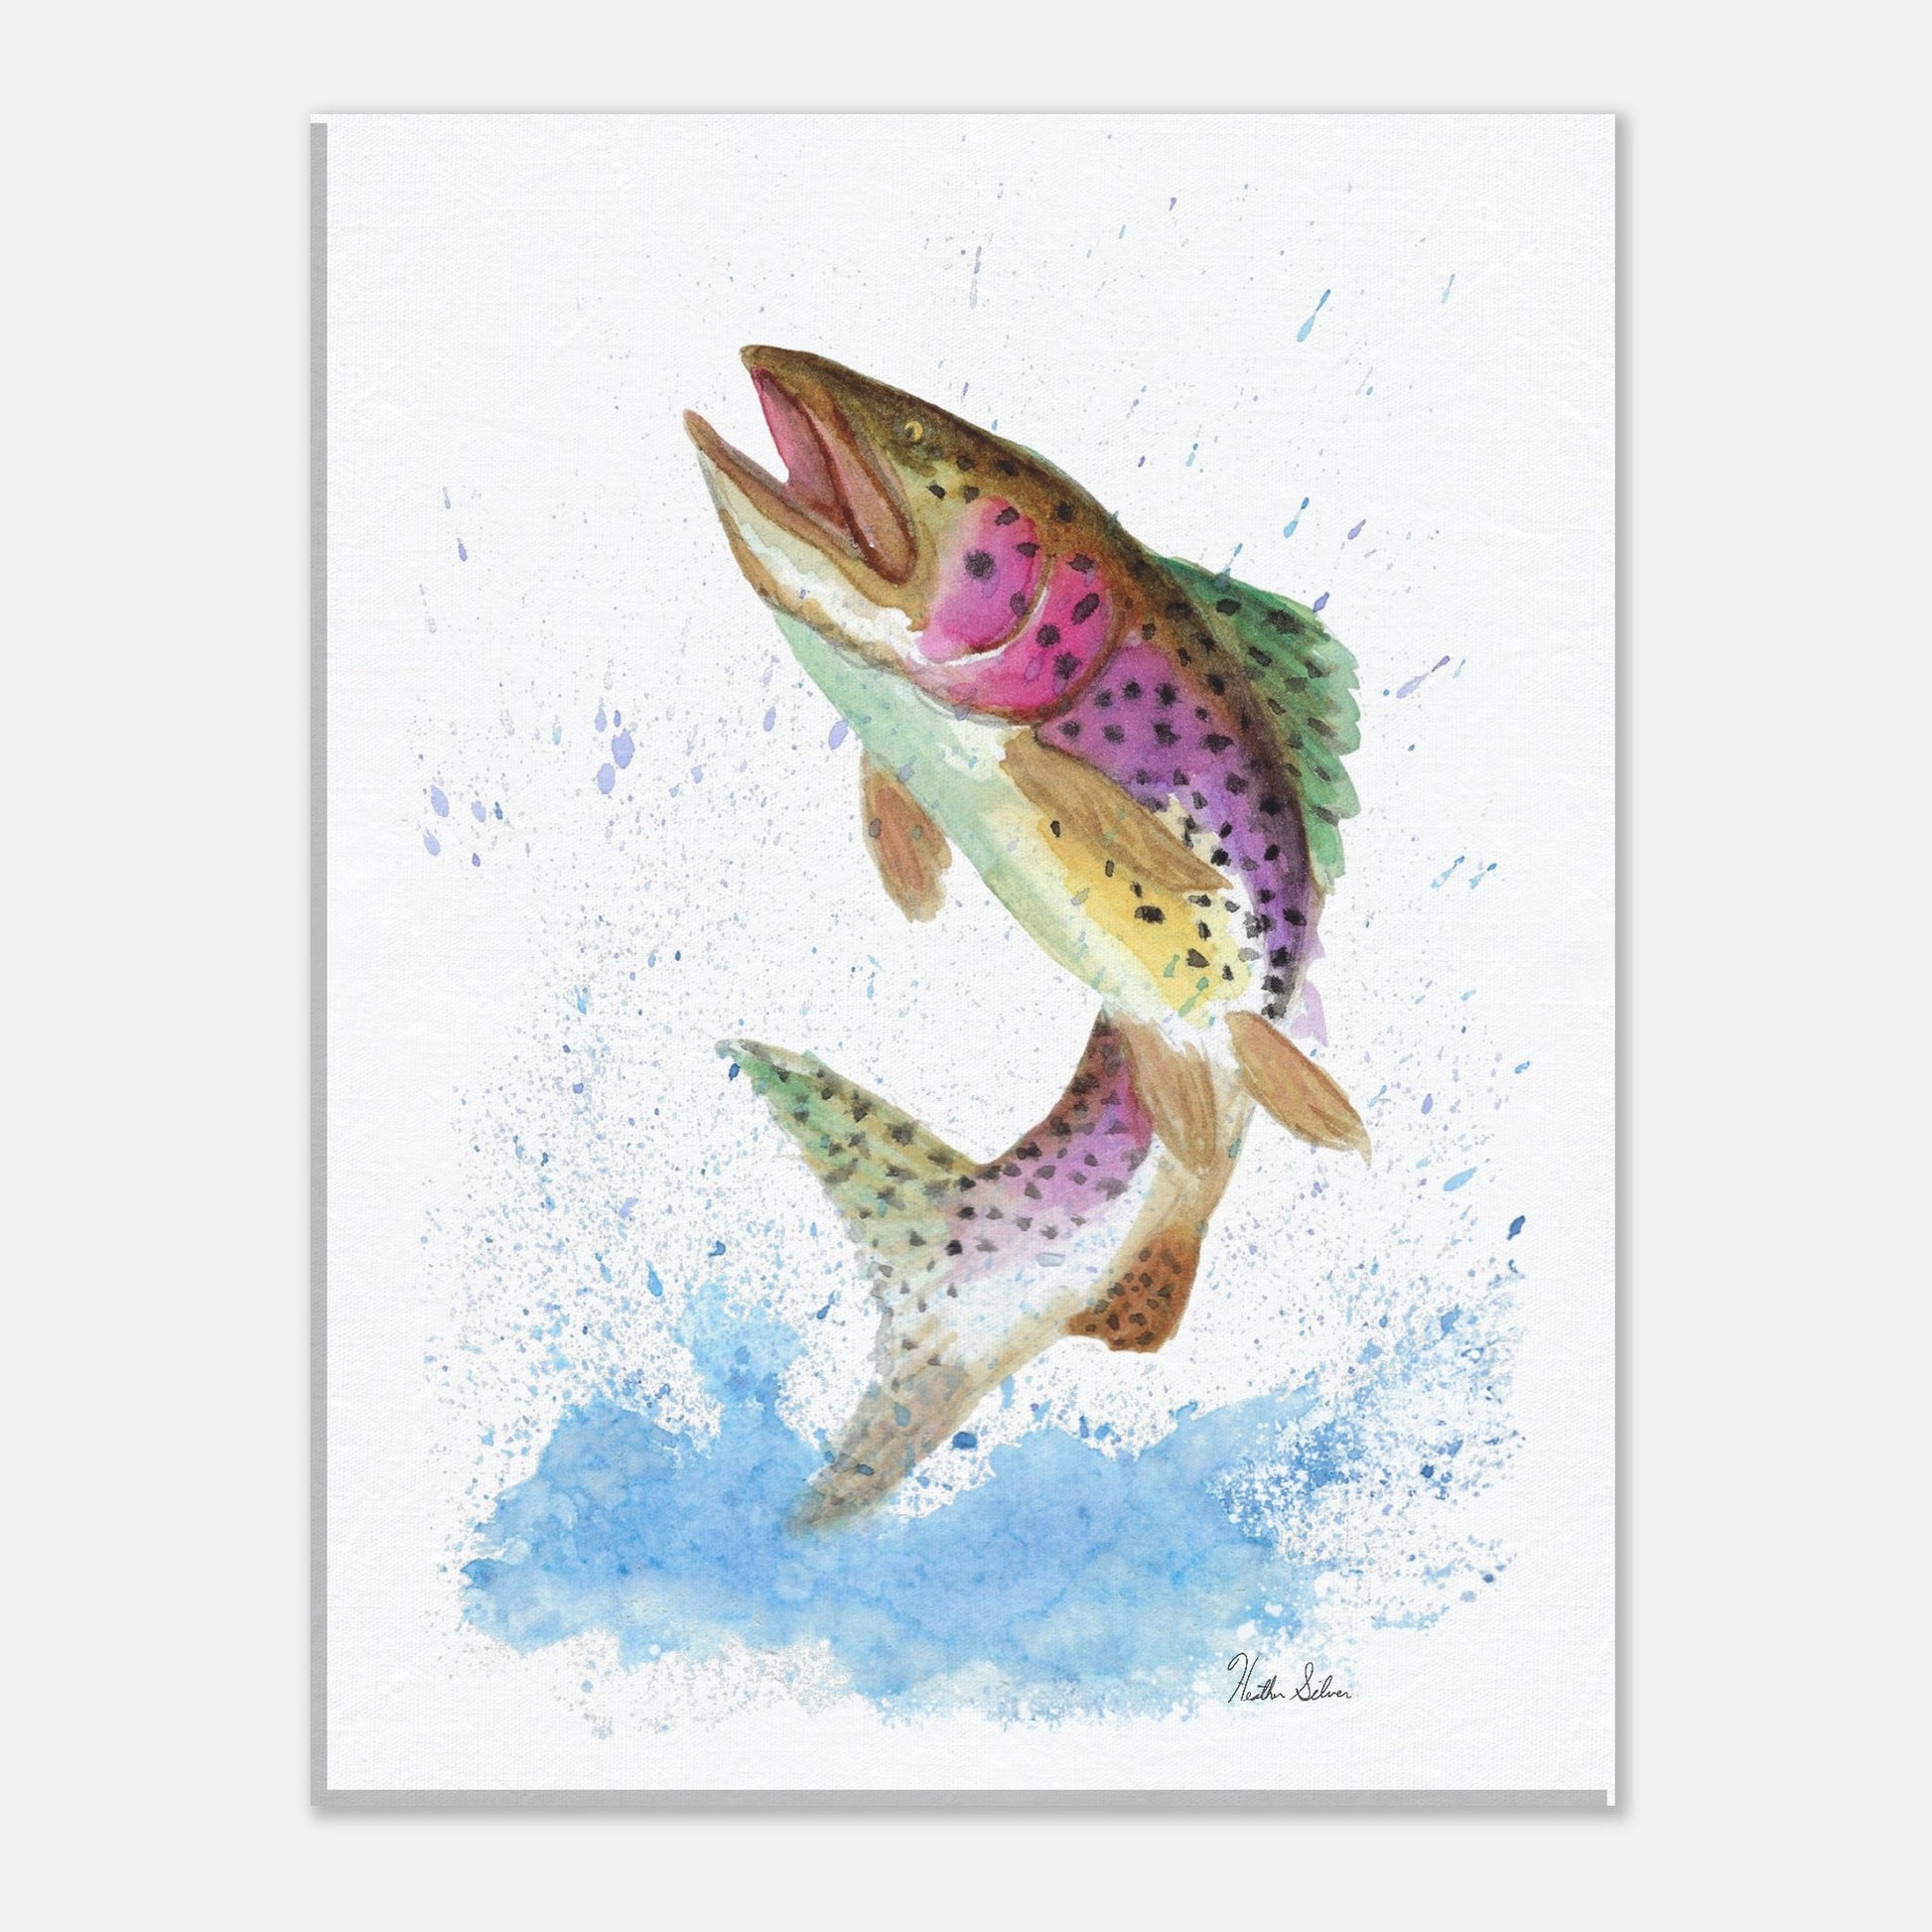 24 by 32 inch slim canvas wall art print featuring a watercolor painting of a rainbow trout leaping from the water. Hanging hardware included.